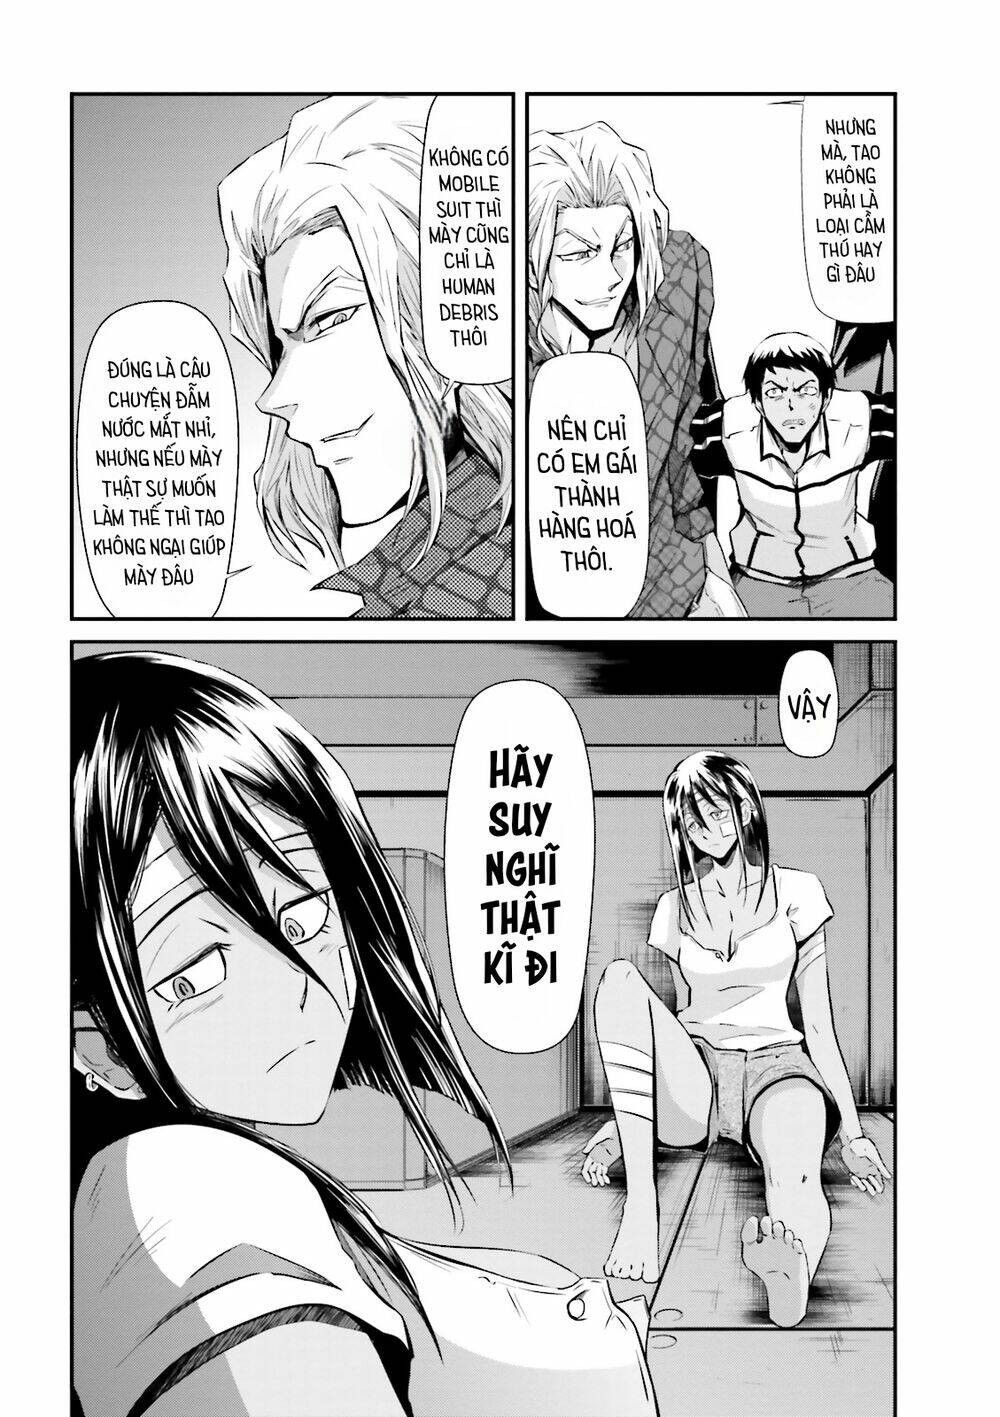 Mobile Suit Gundam Iron-Blooded Orphans Gekko: Chapter 3: 3 tháng không dịch